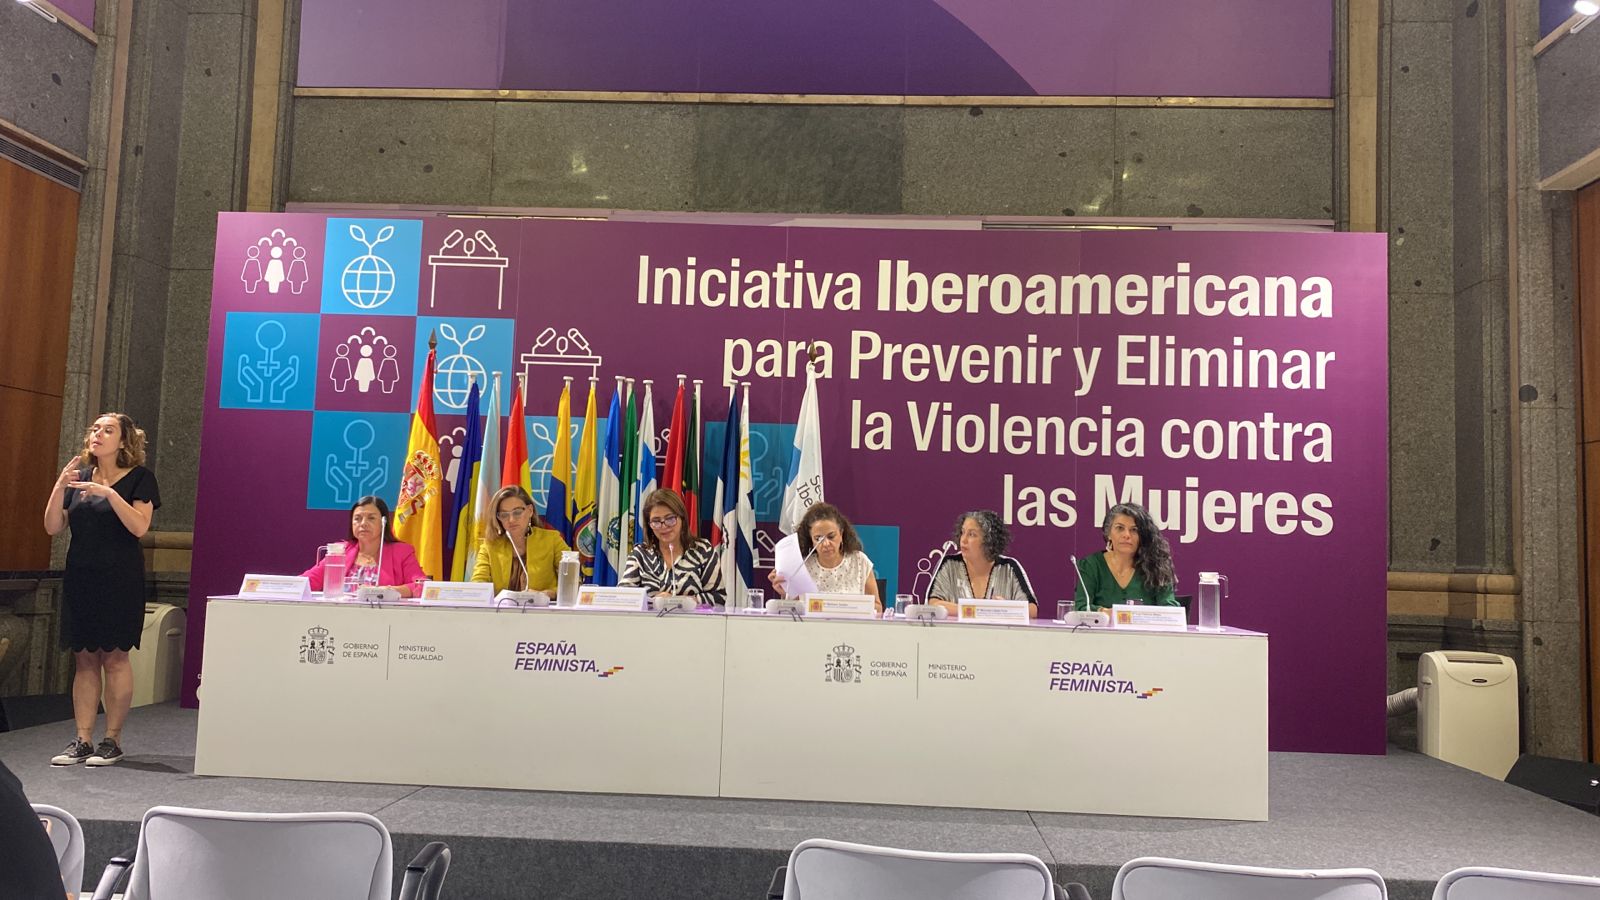 Ceremony of Transfer of the Presidency of the Ibero-American Initiative to Prevent and Eliminate Violence against Women. Organized by the Ibero-American Initiative to Prevent and Eliminate Violence against Women (IIPEVCM); Ministry of Equality of Spain; Ministry of Women of the Dominican Republic; Ibero-American General Secretariat (SEGIB) and the Ministry of Foreign Affairs and the National Institute for Women of Mexico.